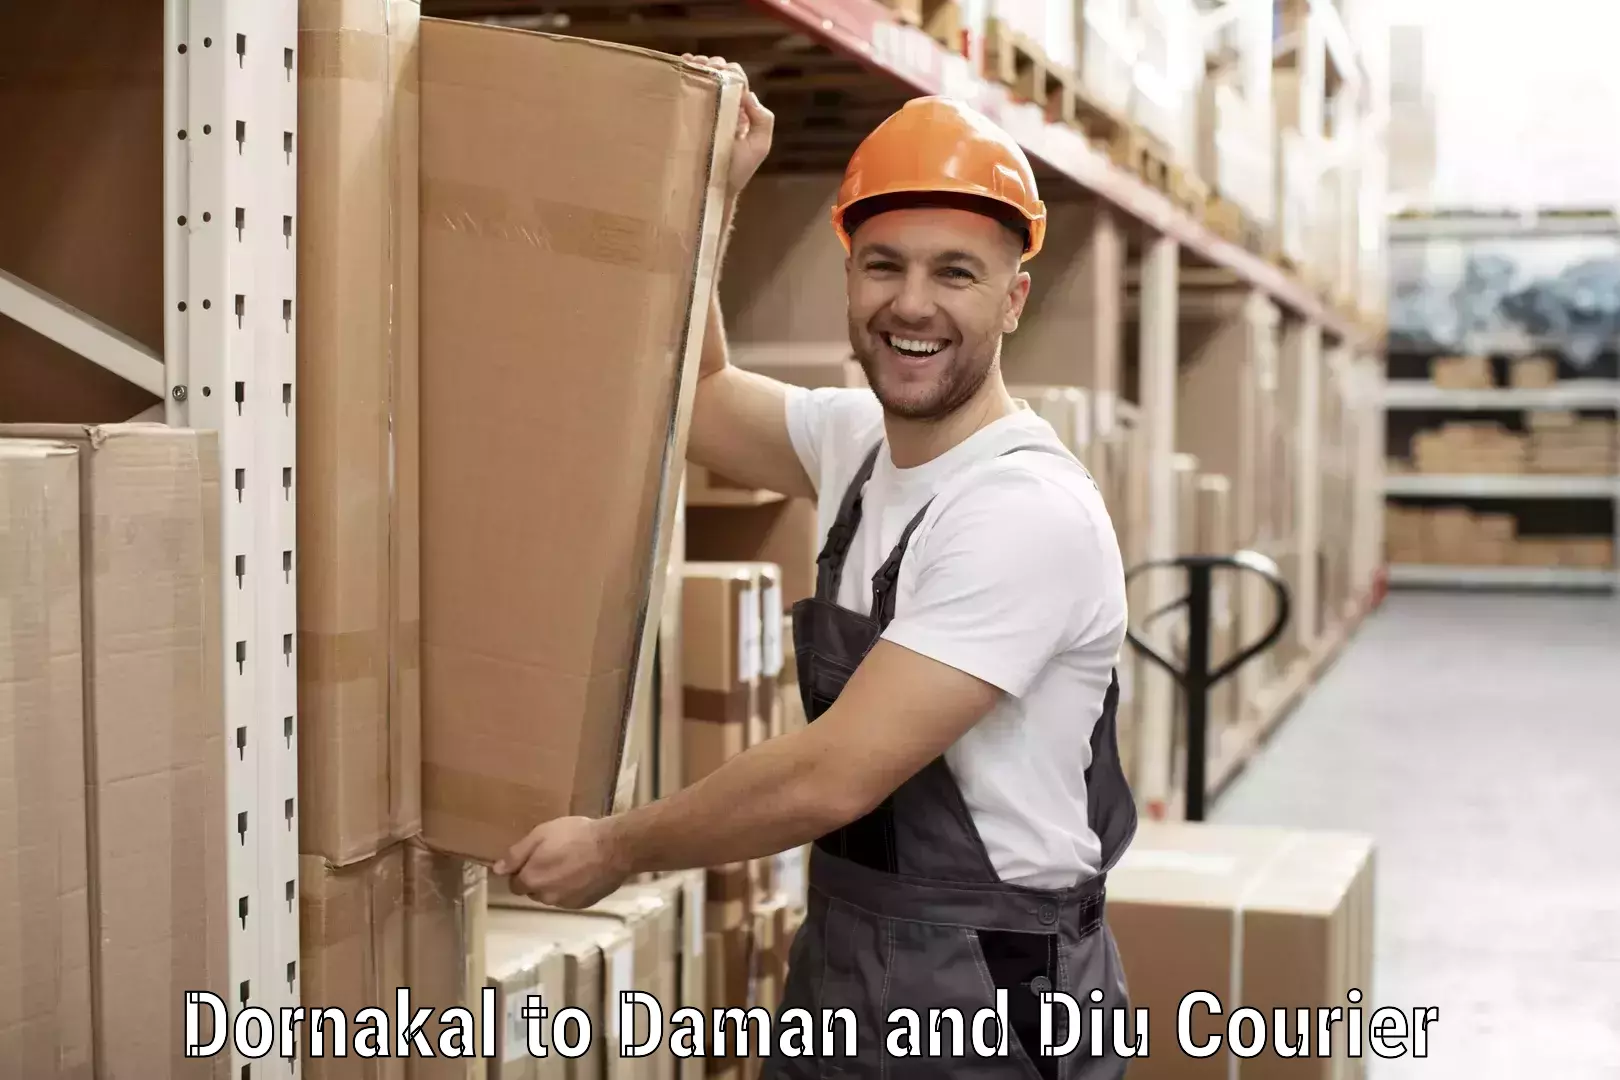 Small business couriers Dornakal to Daman and Diu